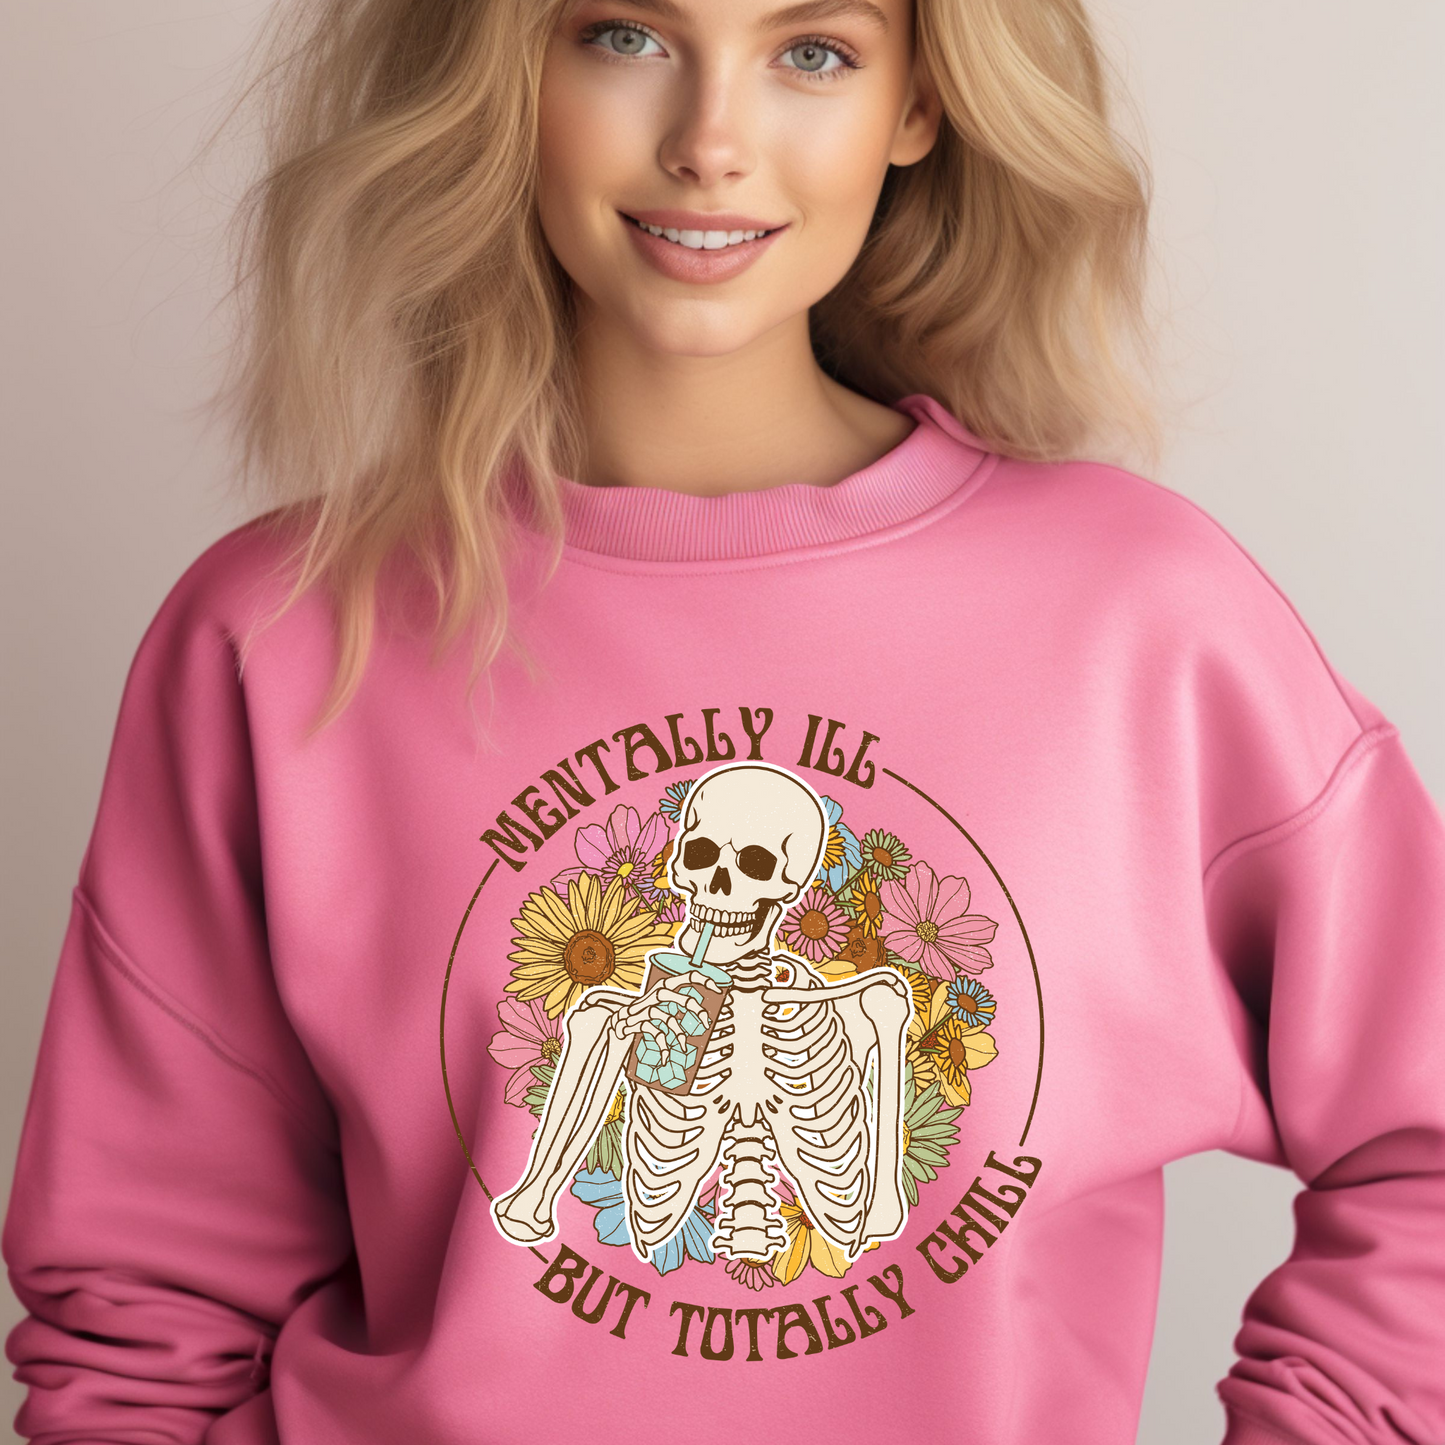 Mentally Ill but totally chill crewneck sweater